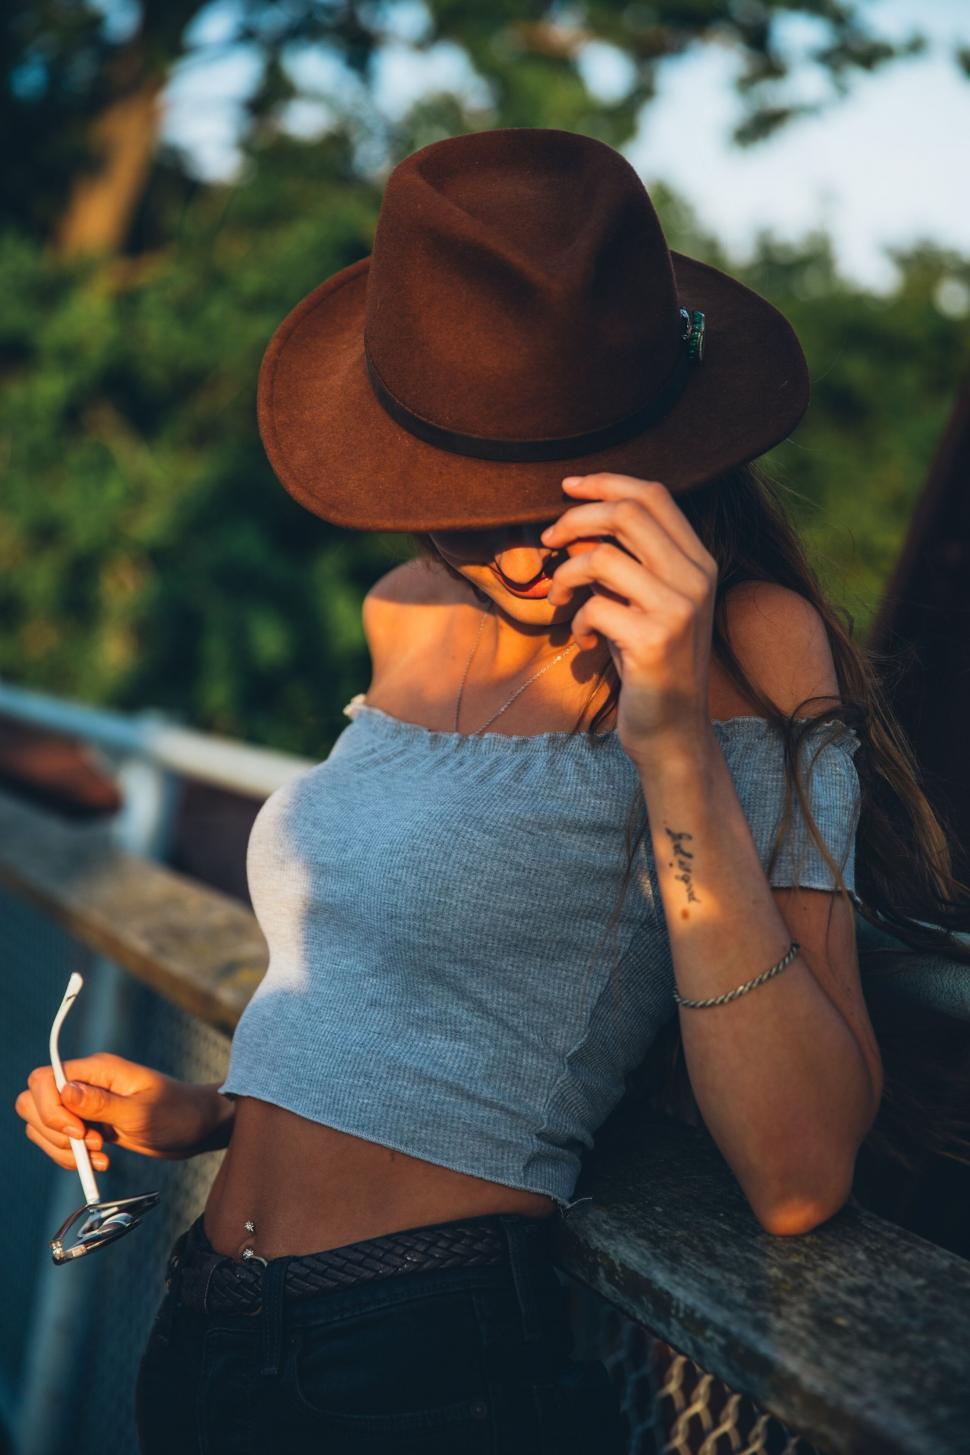 Free Image of Fashionable woman adjusting hat with sunglasses 